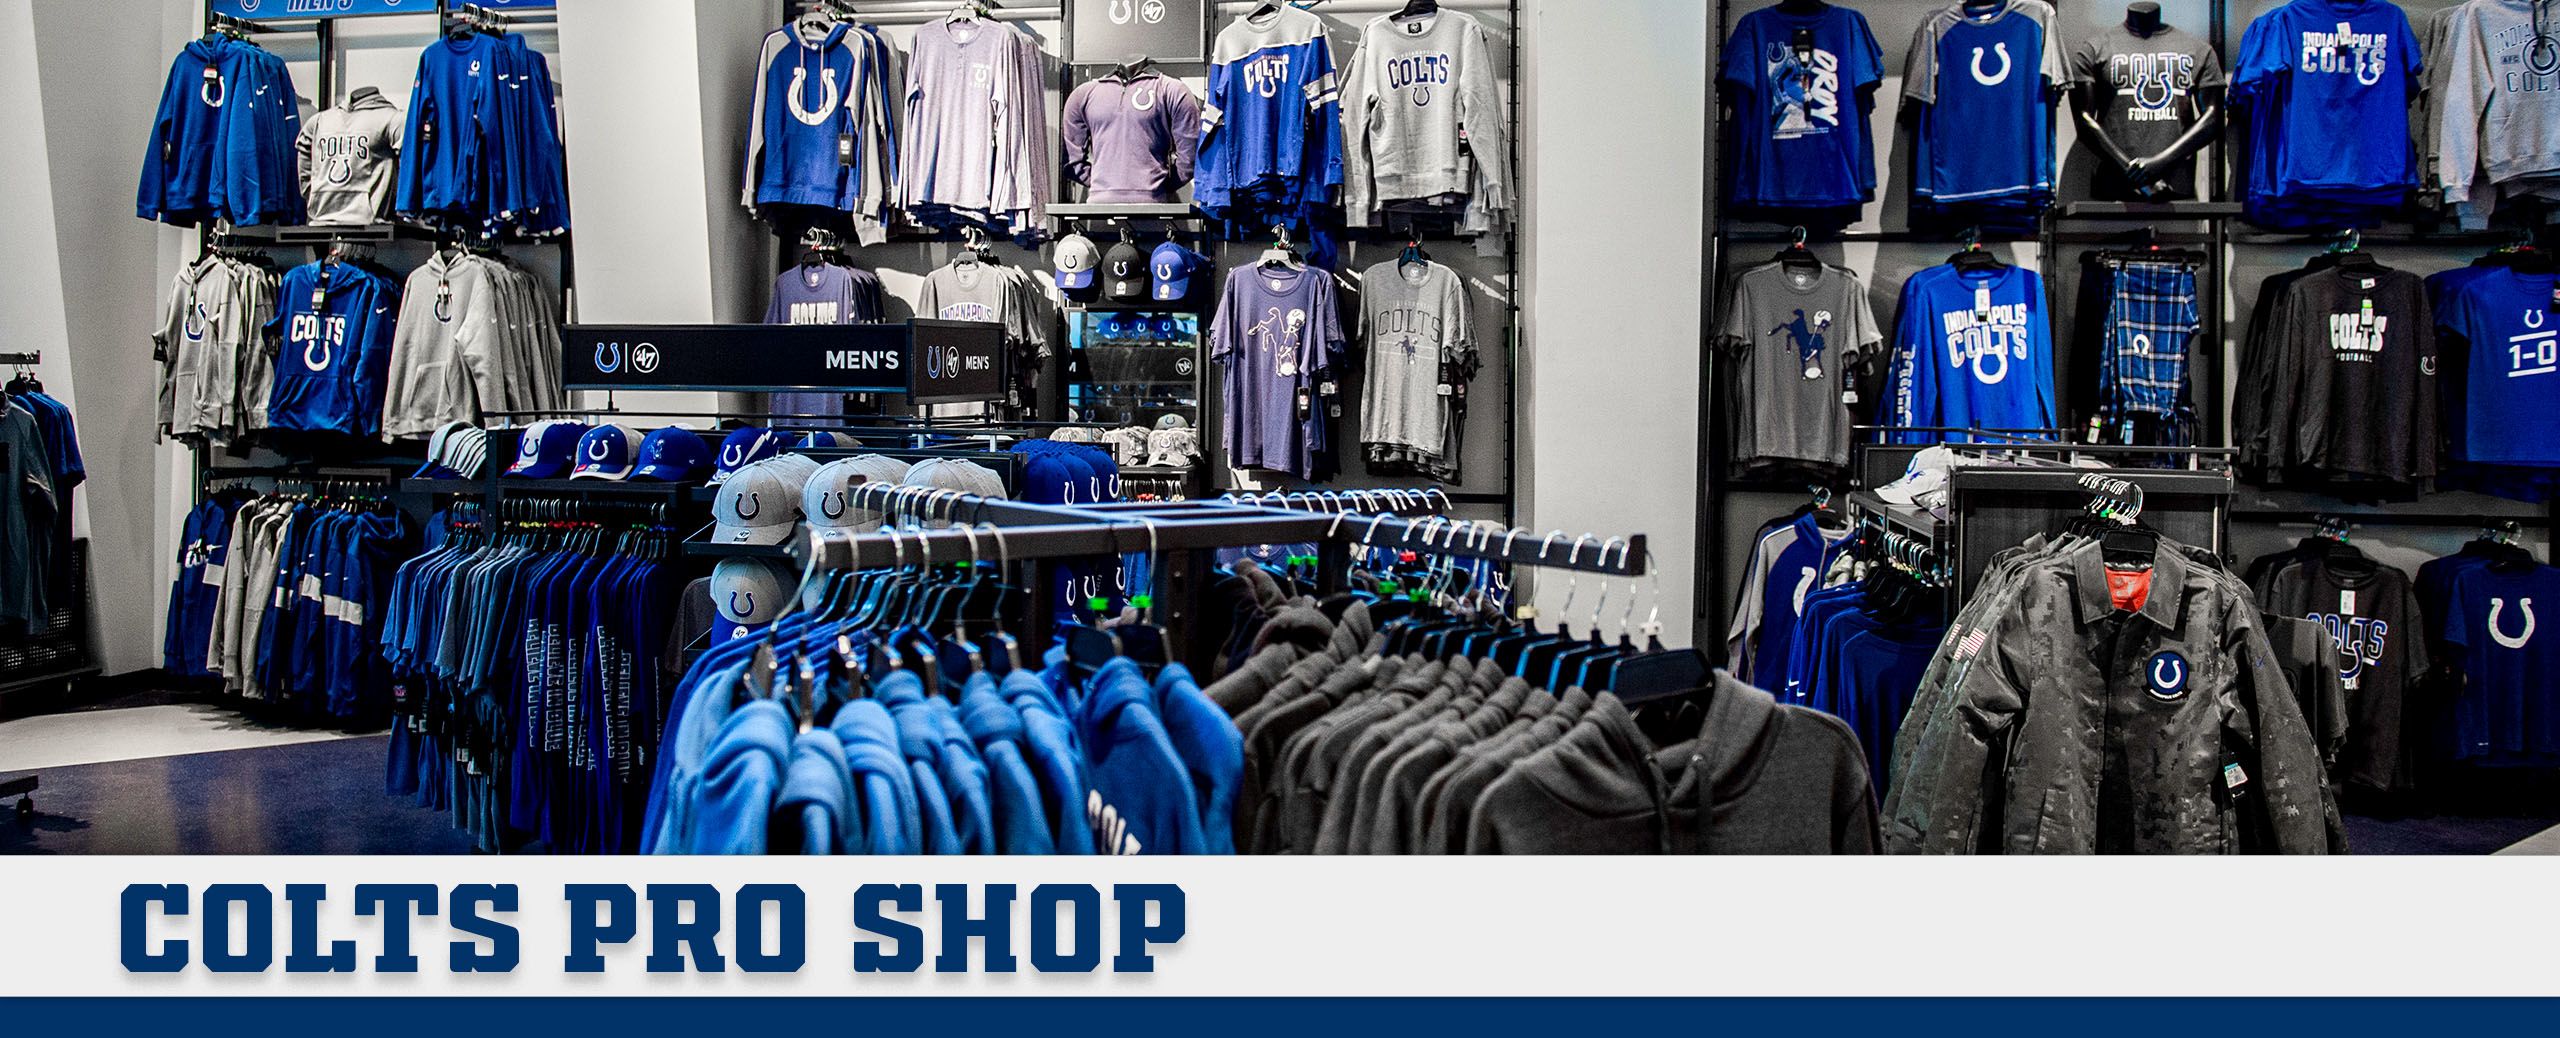 places to buy nfl gear near me